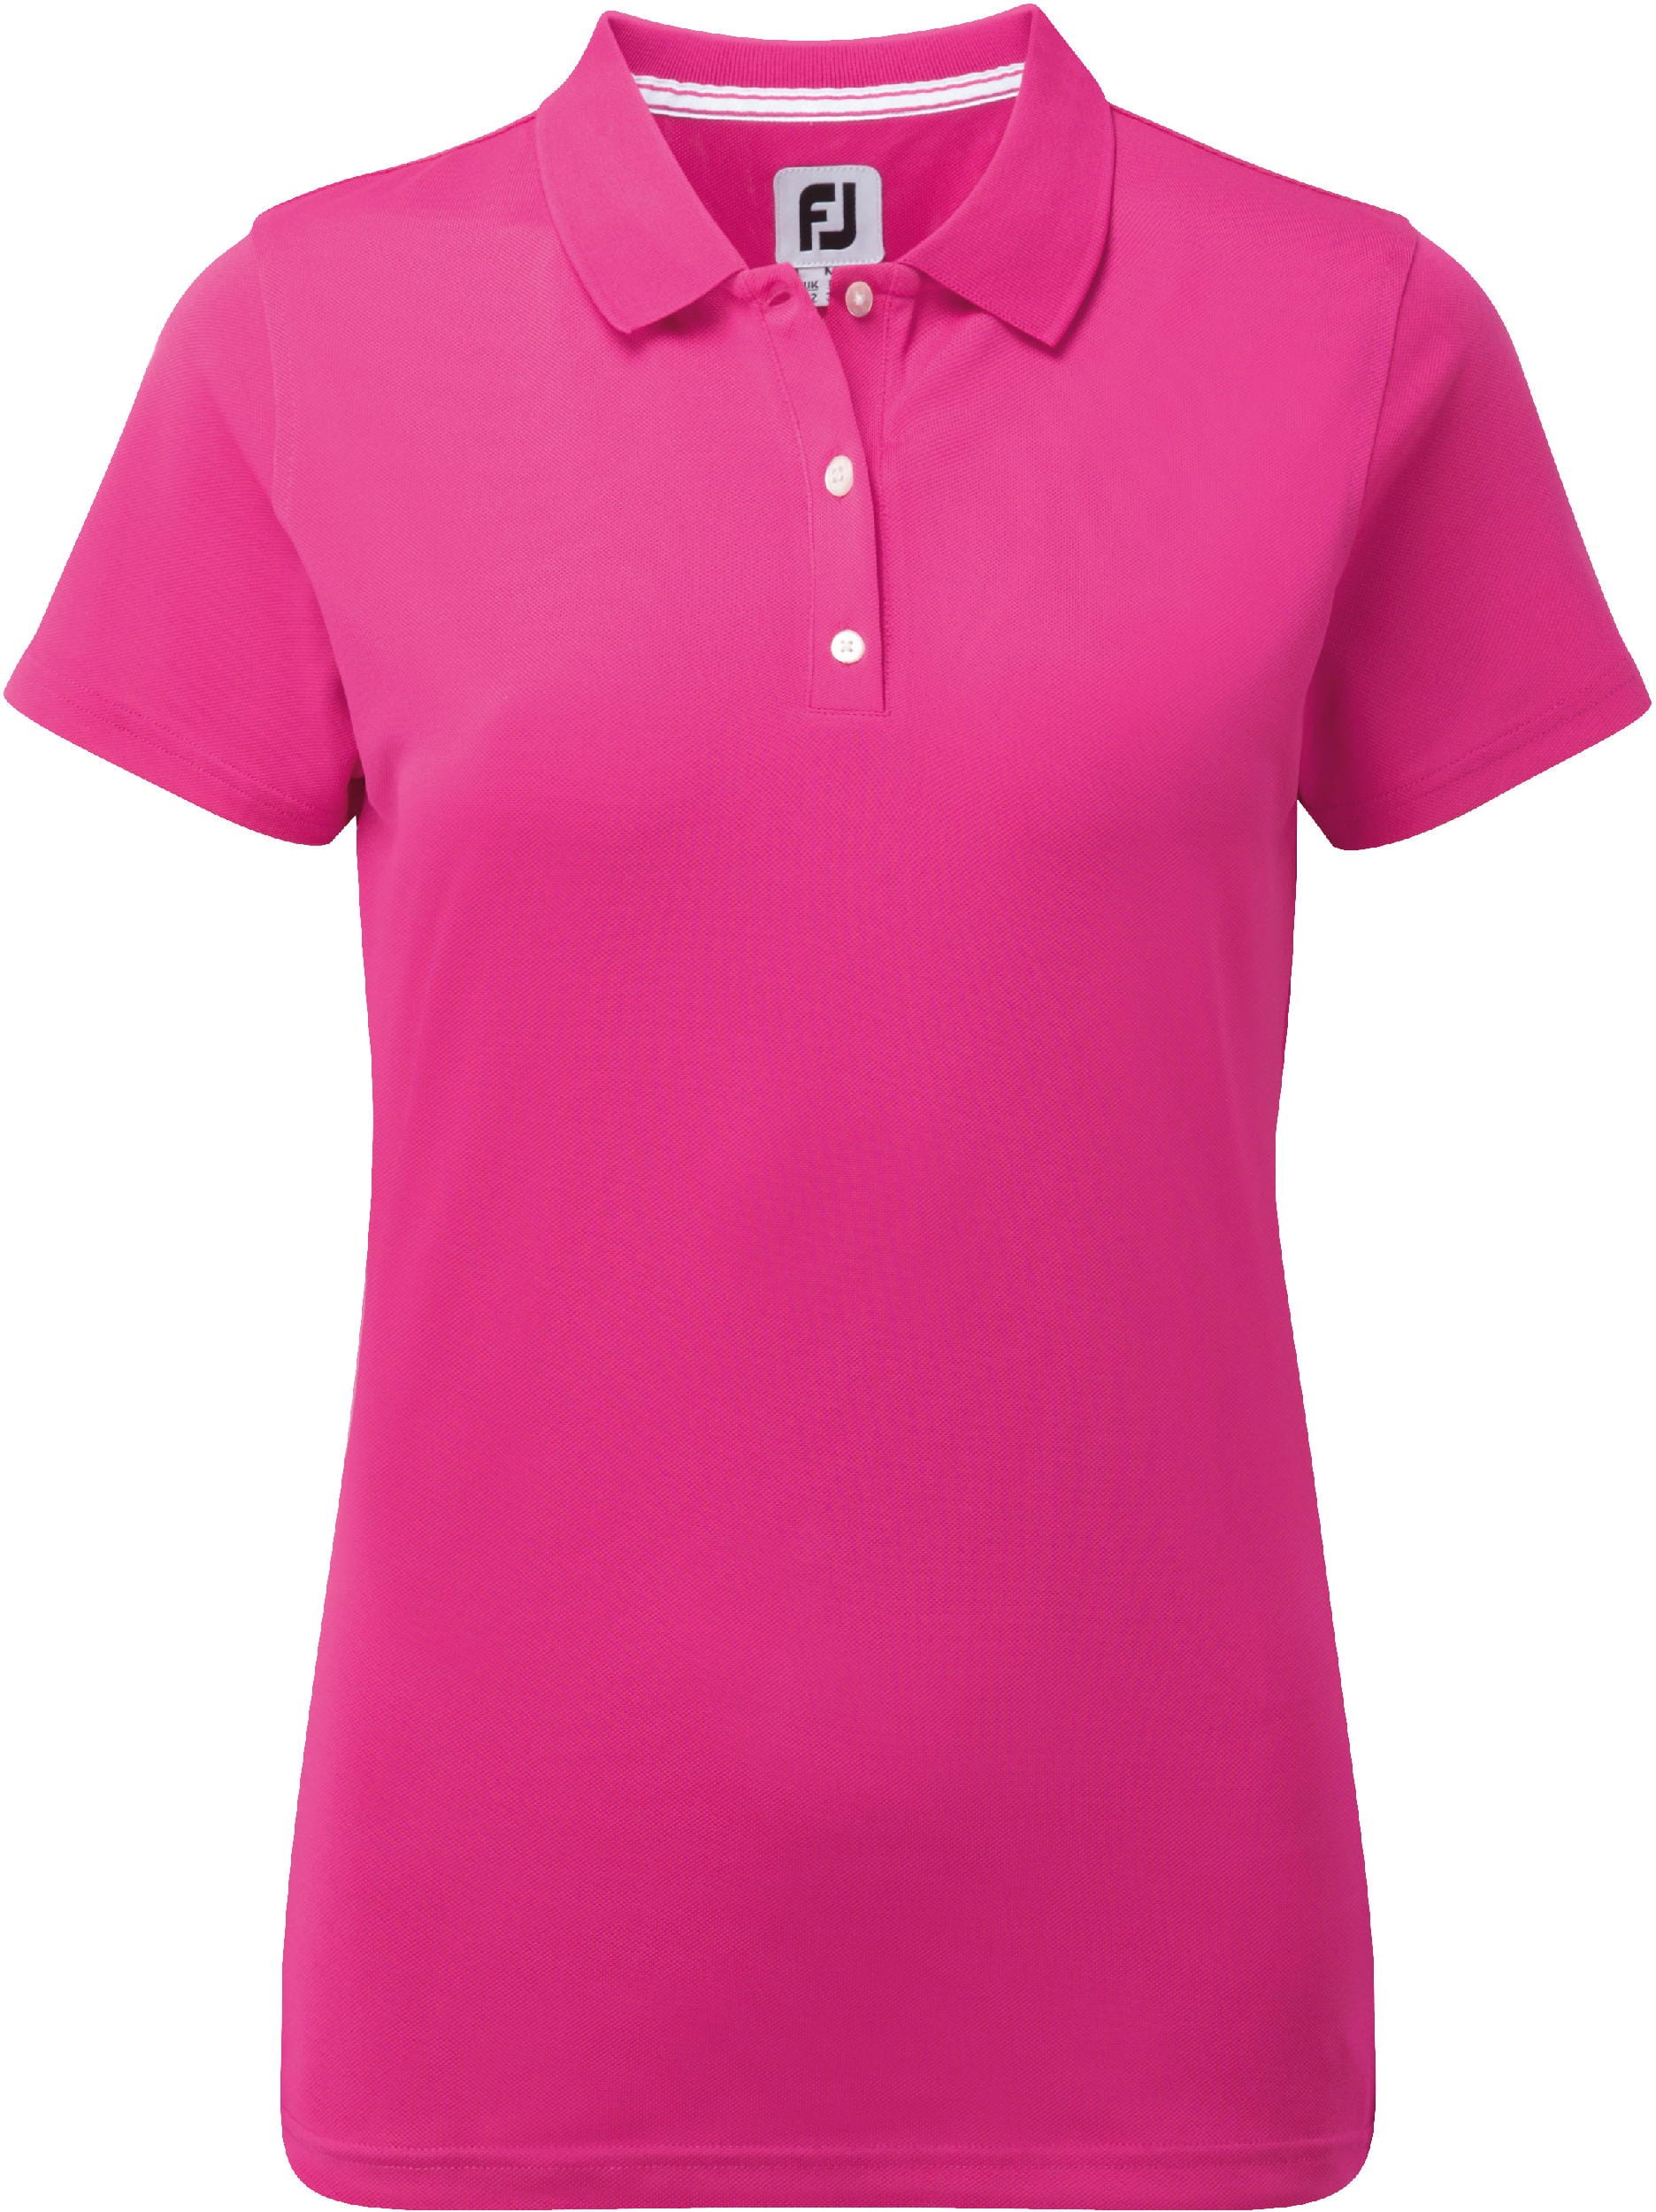 FootJoy Stretch Pique Solid Polo, hot pink